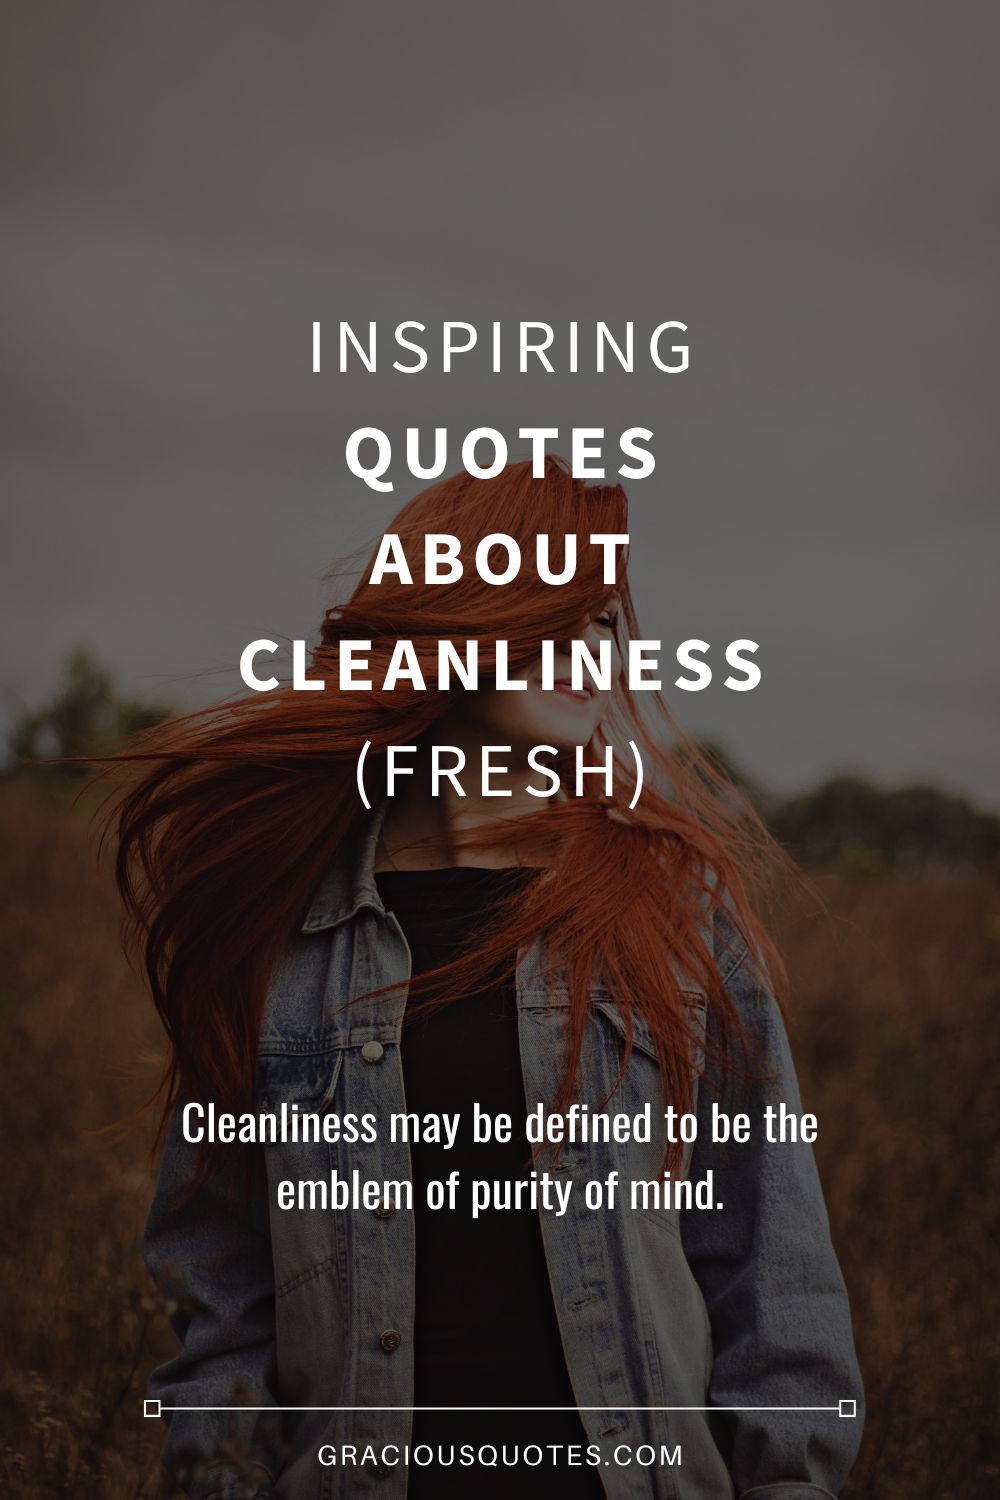 Inspiring Quotes About Cleanliness (FRESH) - Gracious Quotes